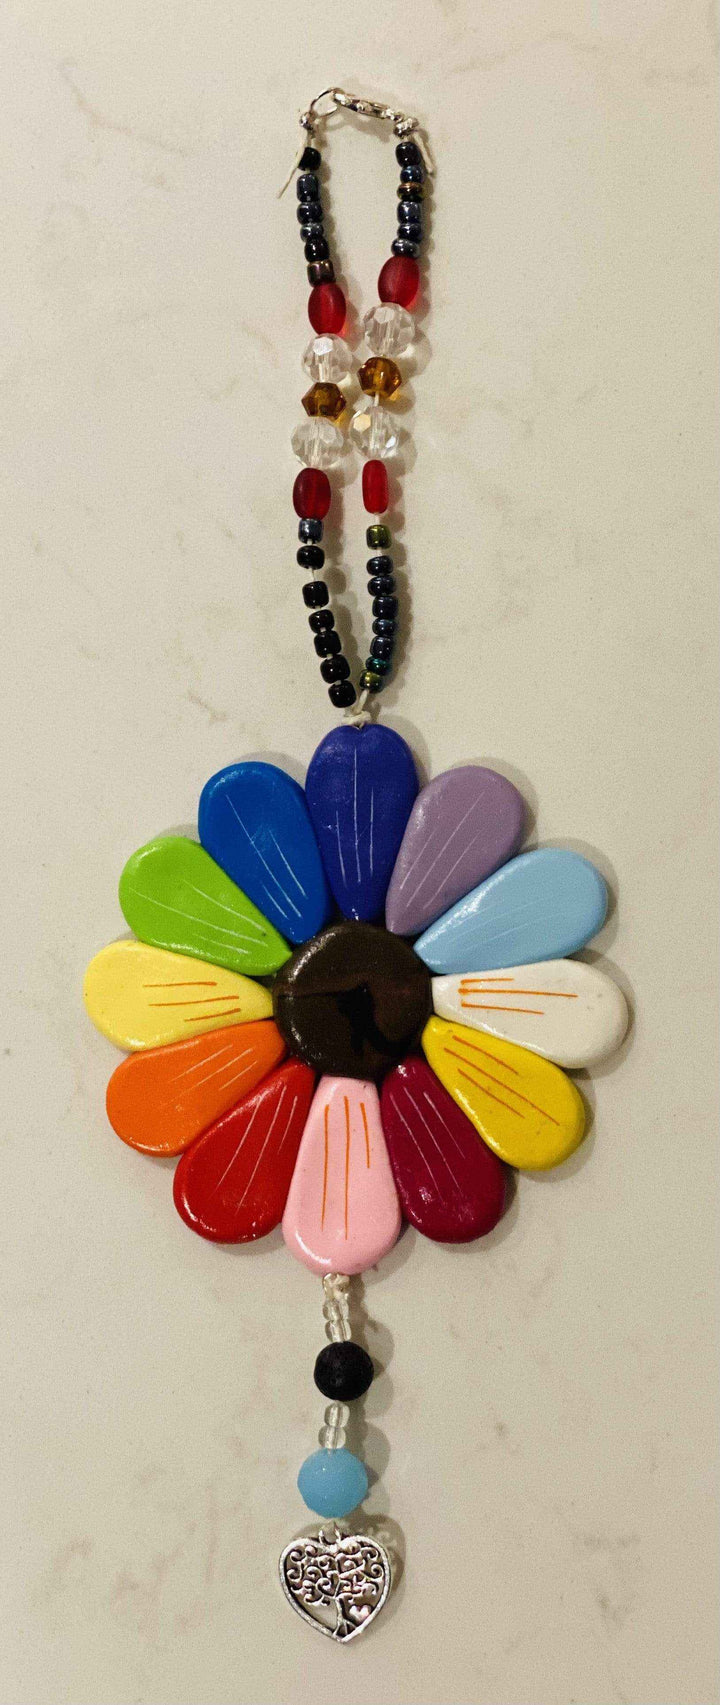 Atlantic Wood N Wares Home & Garden>Home Décor>Kitchen Accessories Rainbow Support IWK Foundation with Sofia Daisy Charms! Charm001